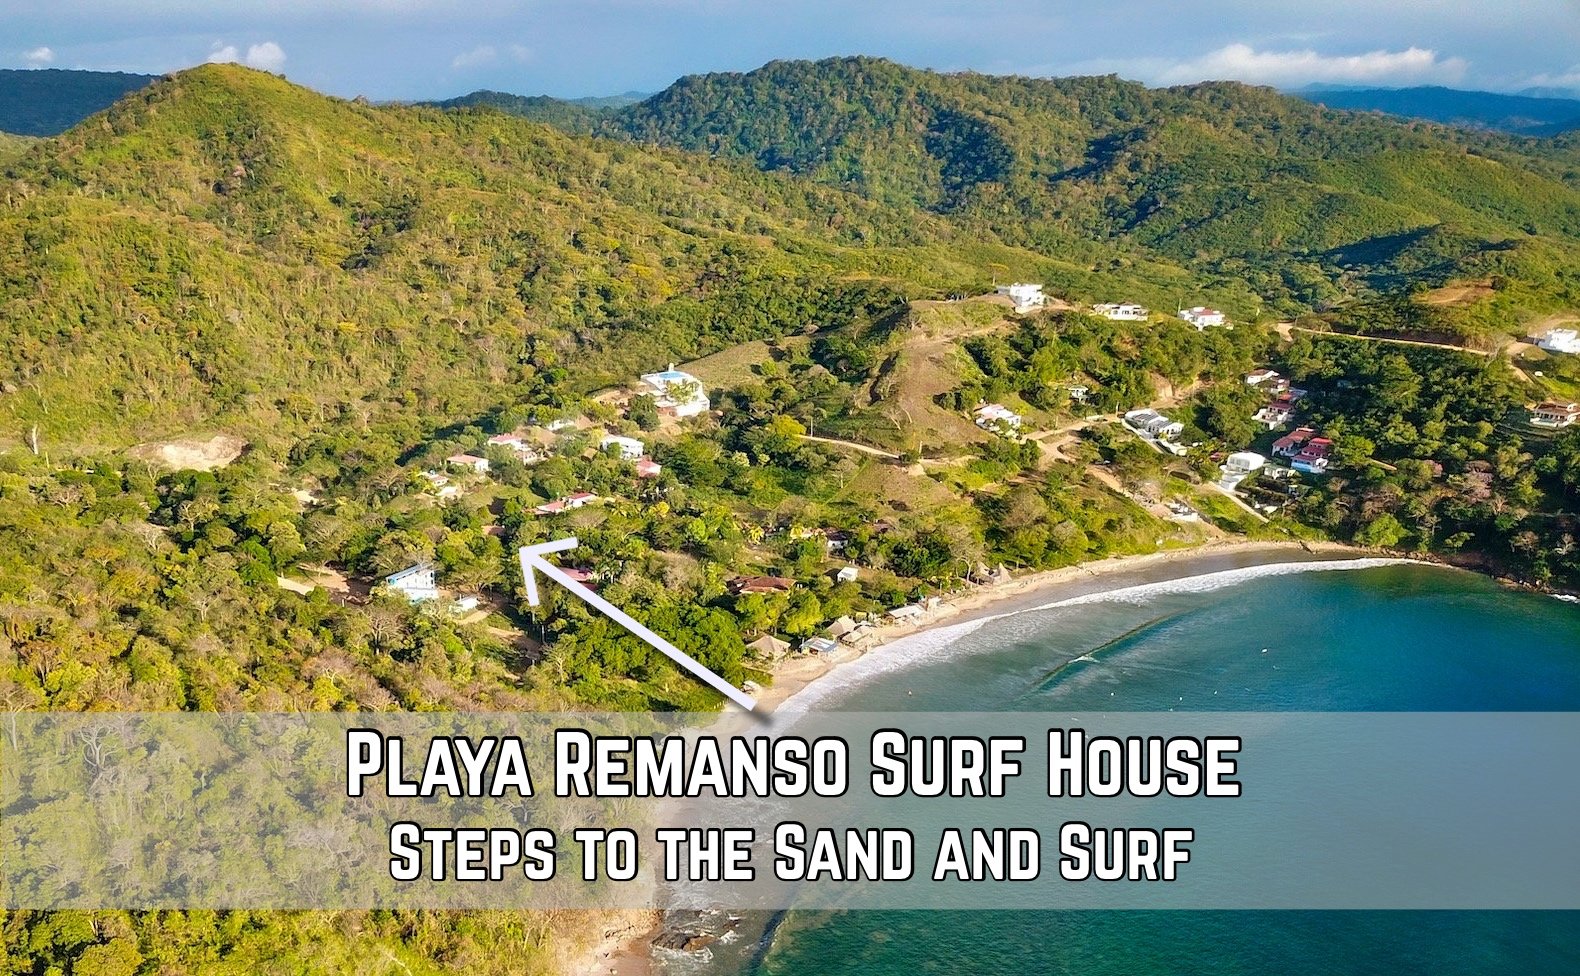 Surf House Beach House For Sale Playa Remanso Nicaragua Property Real Estate.jpg